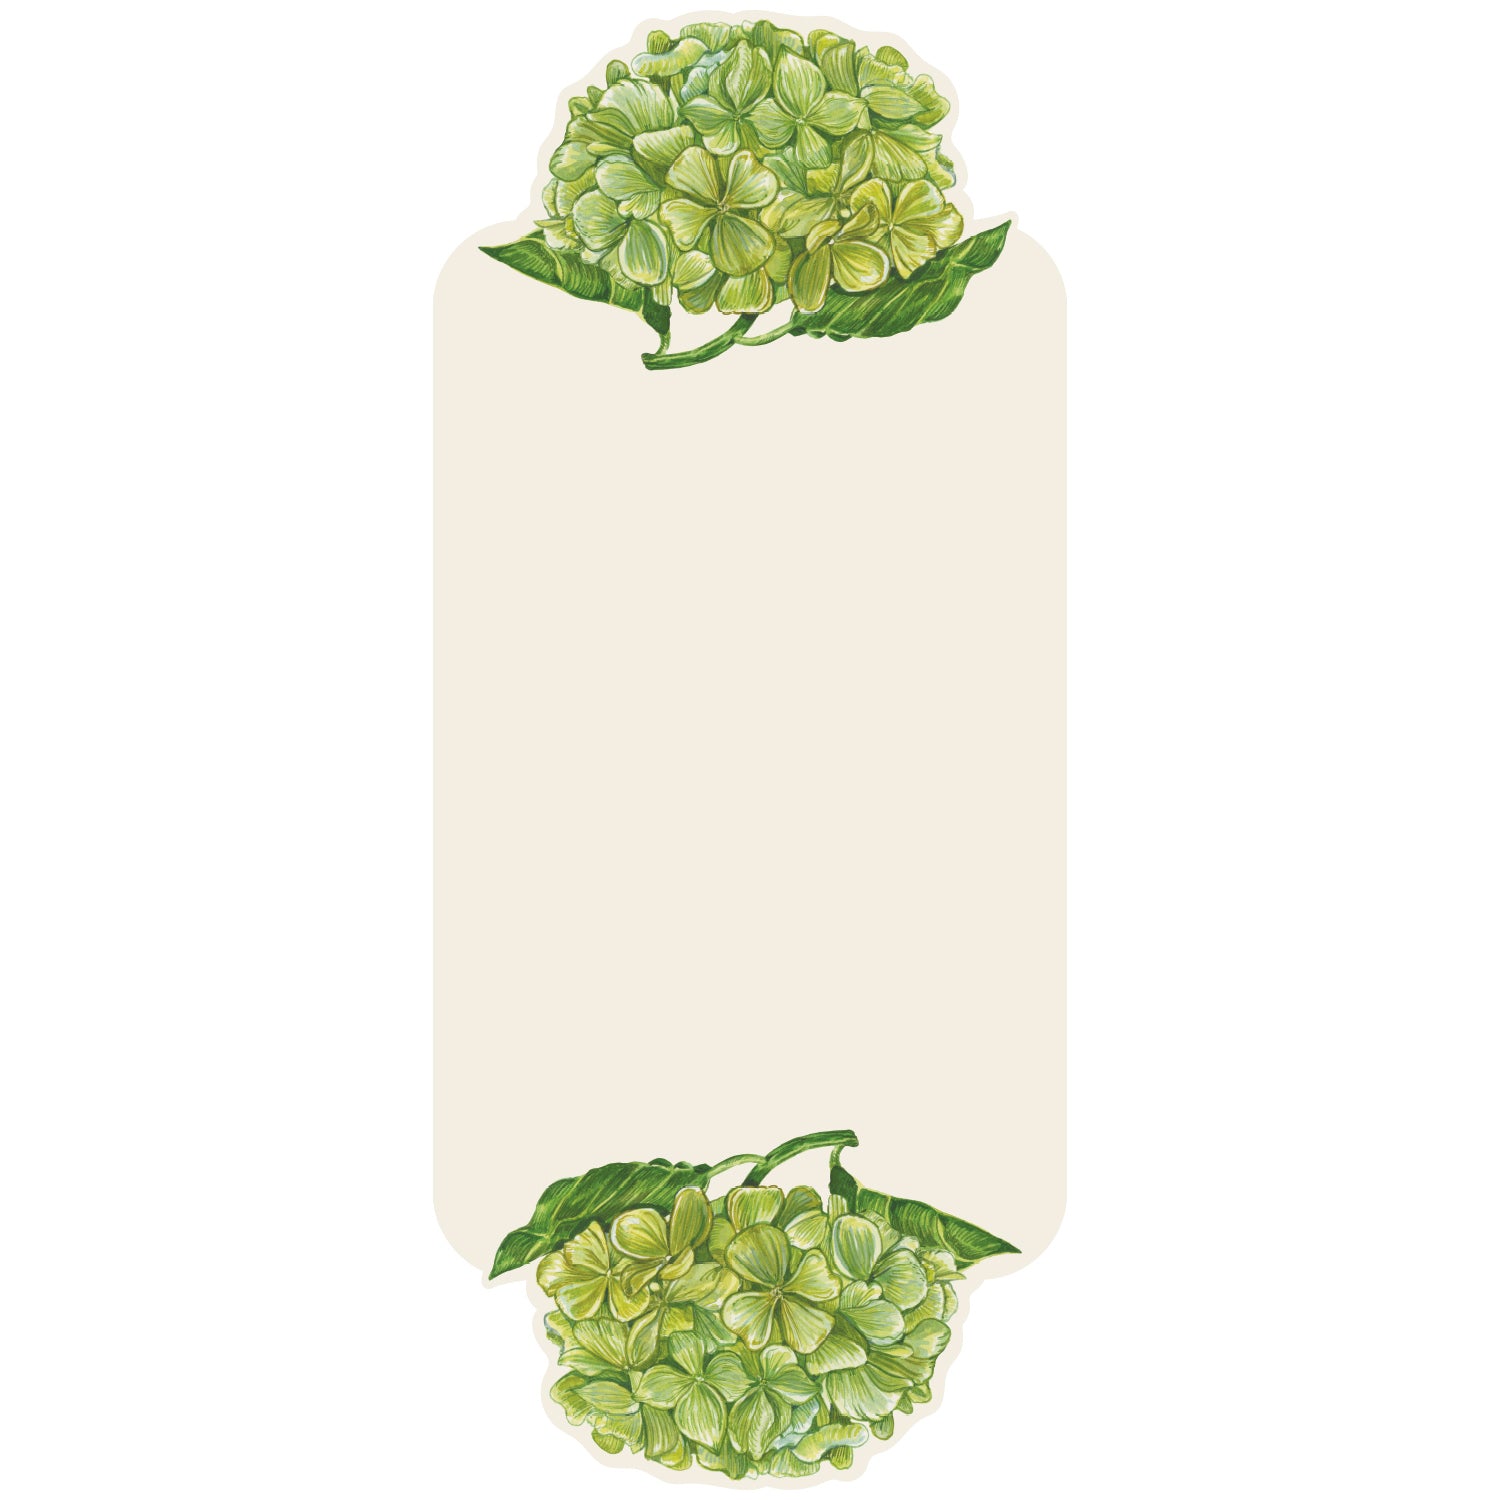 A white, rectangular place card adorned on the top and bottom edges with bright green hydrangea blooms with deep green leaves, leaving an open blank rectangle of space in the middle for personalization.